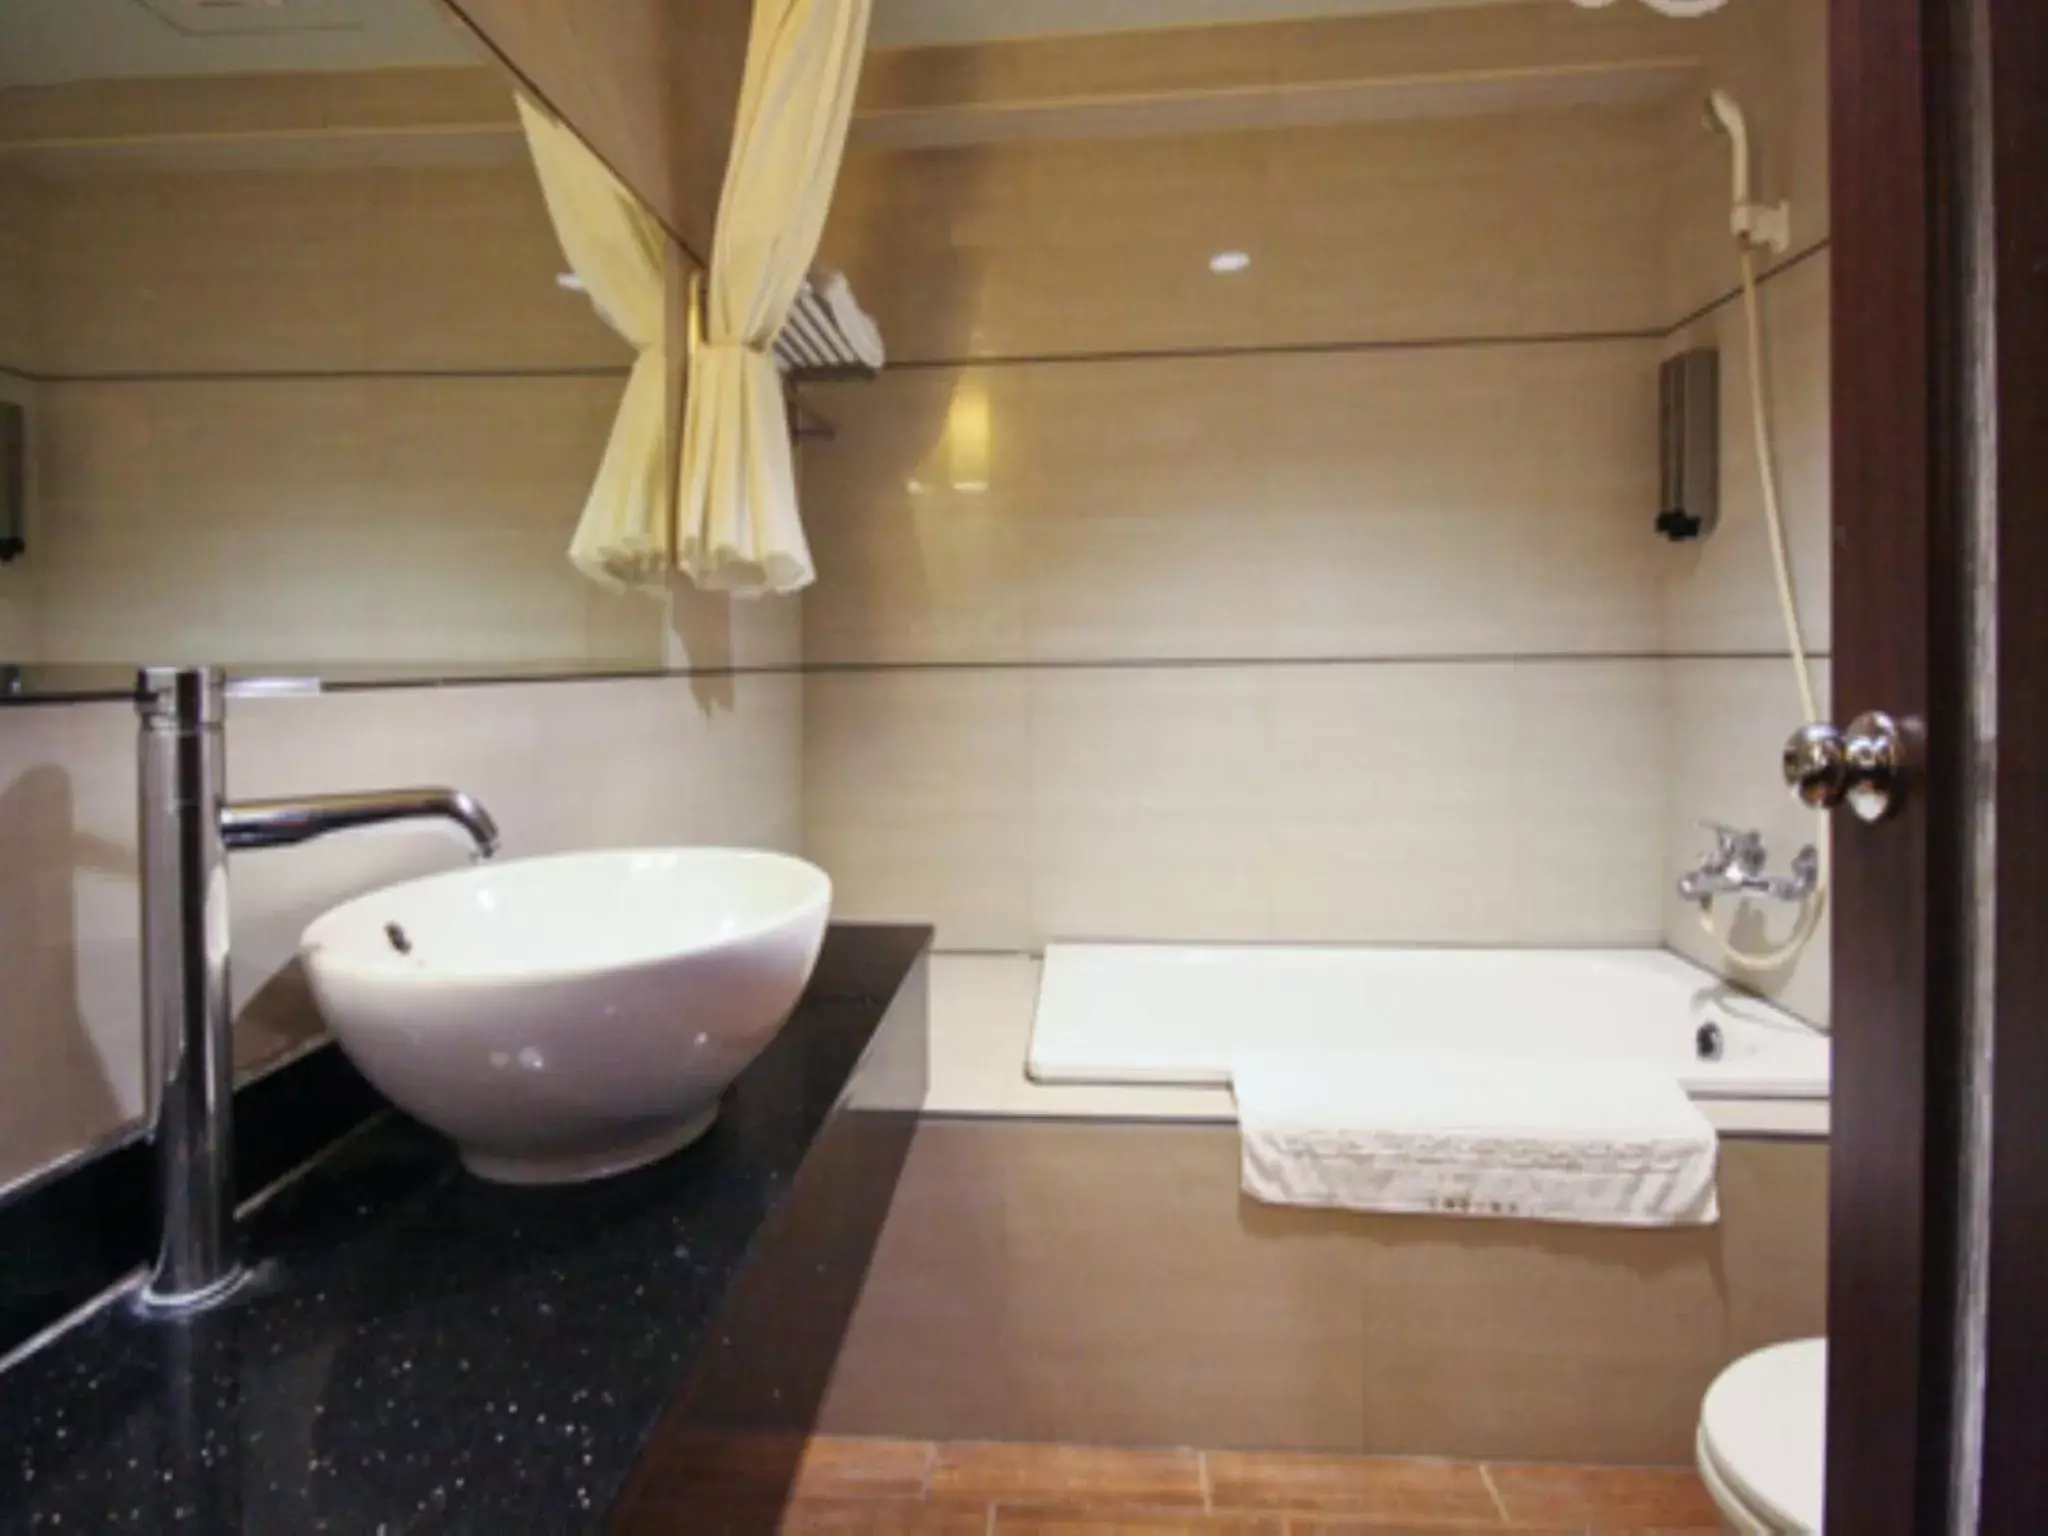 Bathroom in Cheng Pao Hotel